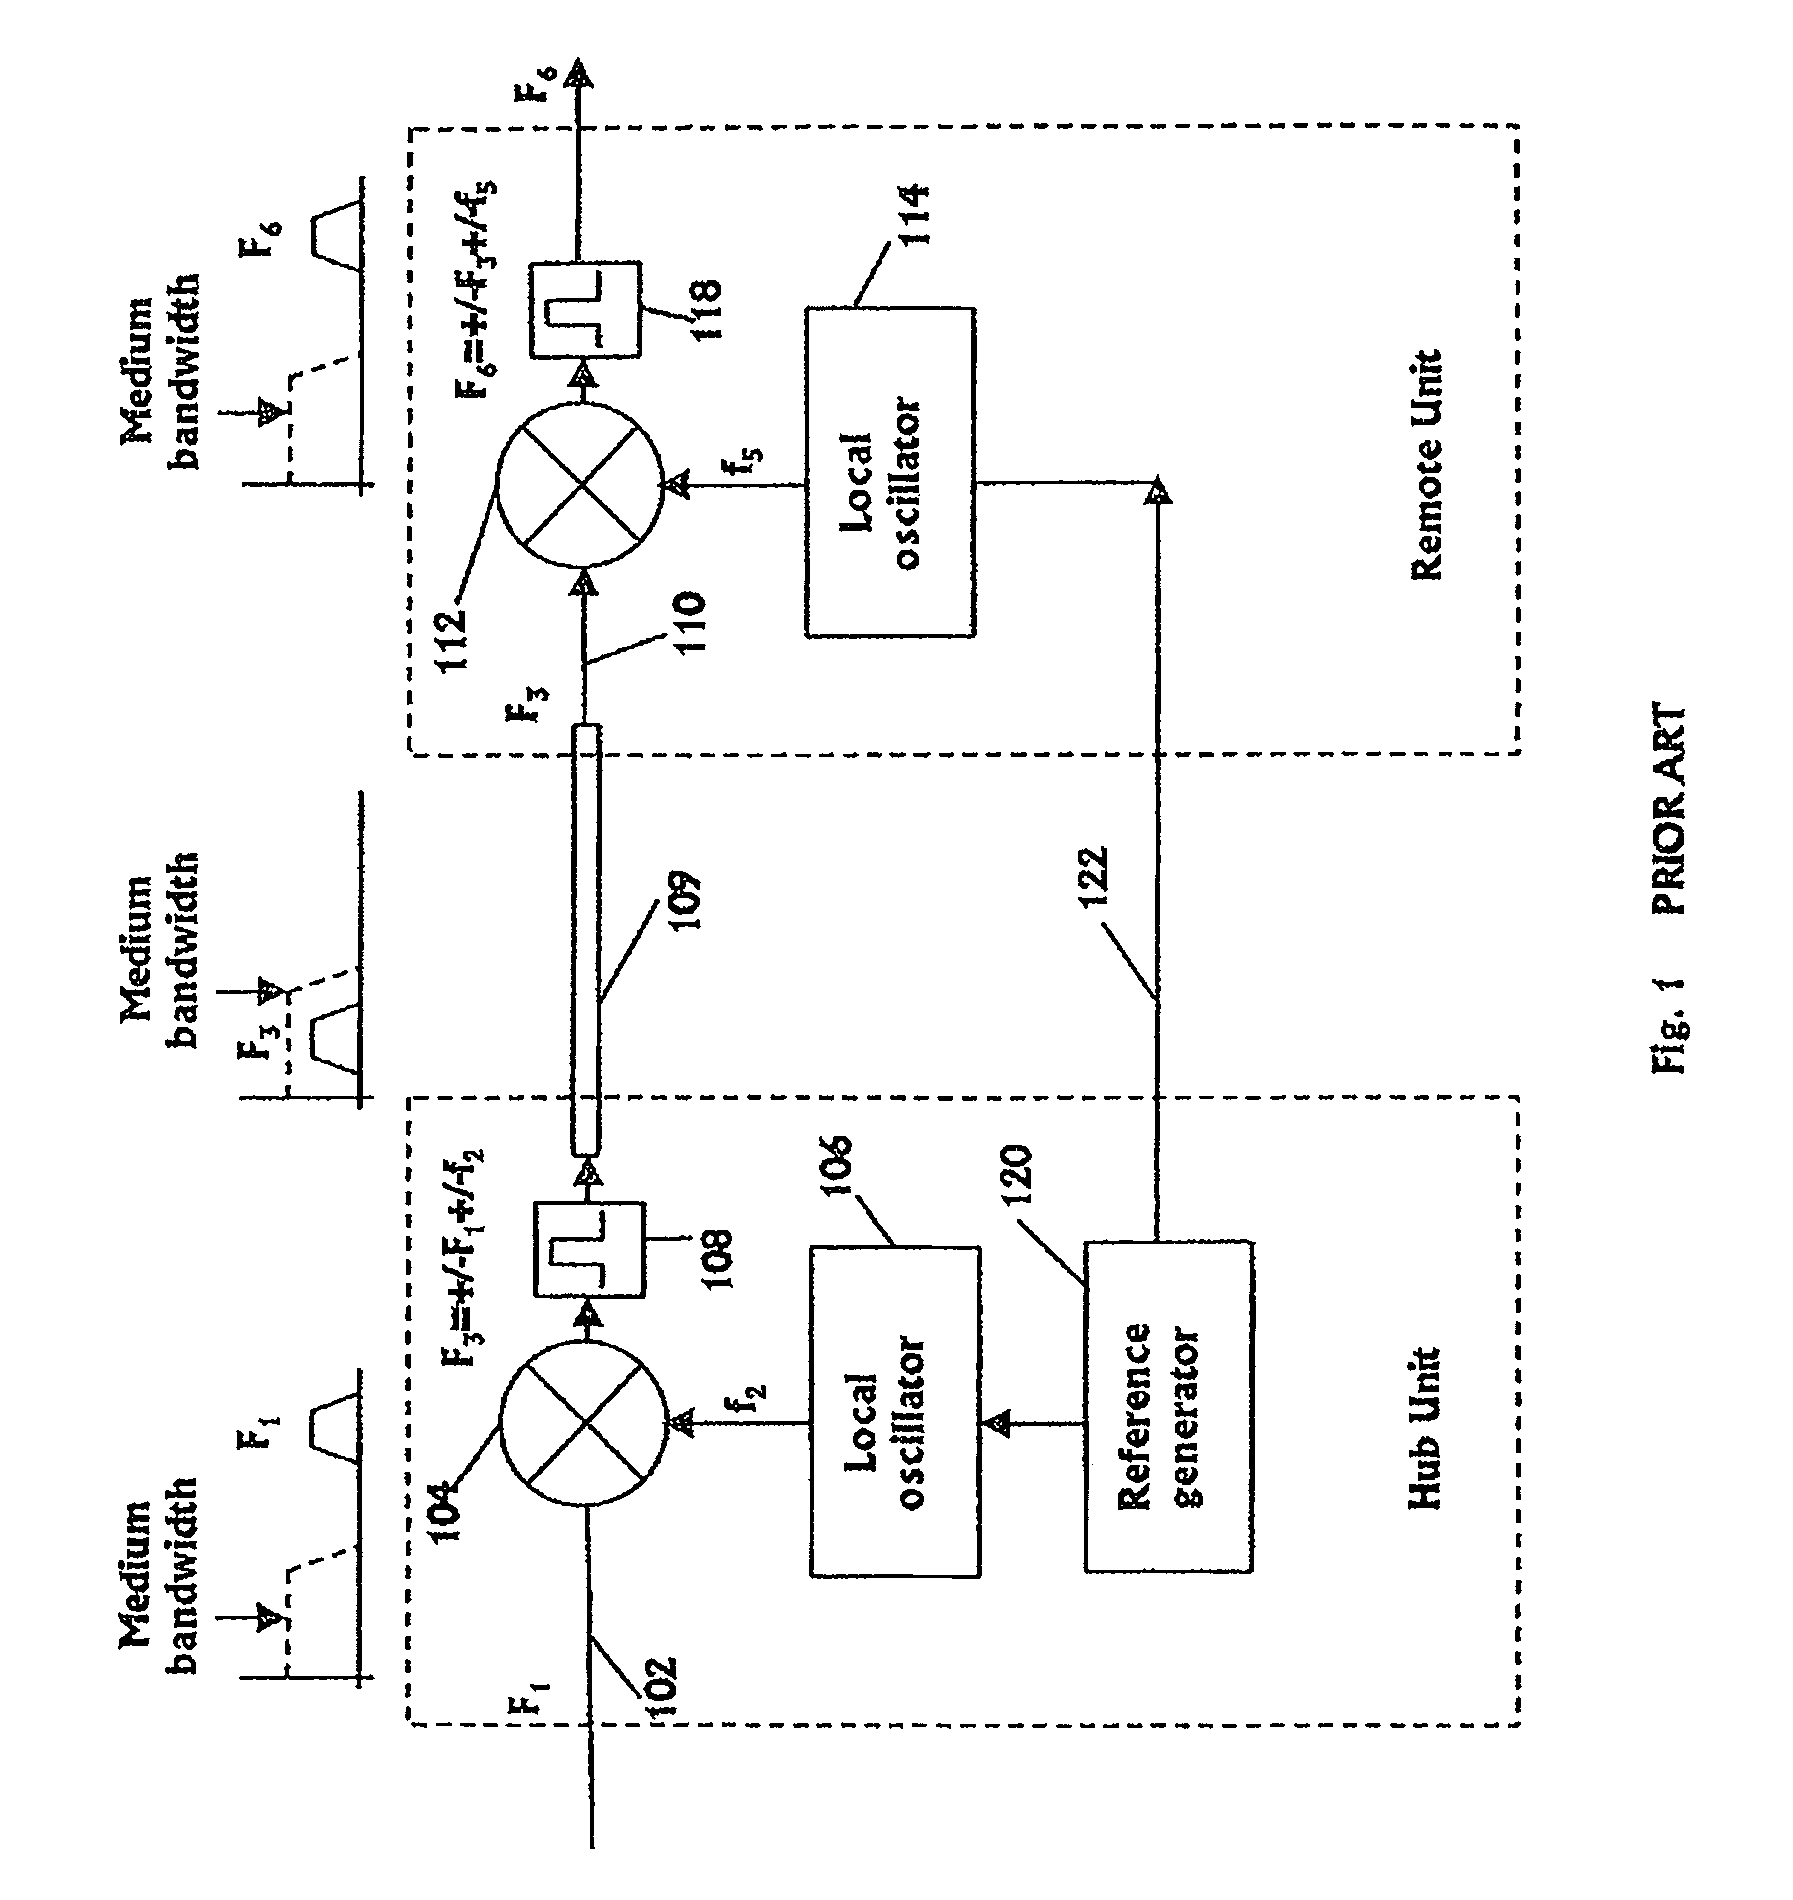 Communication system using cables carrying ethernet signals